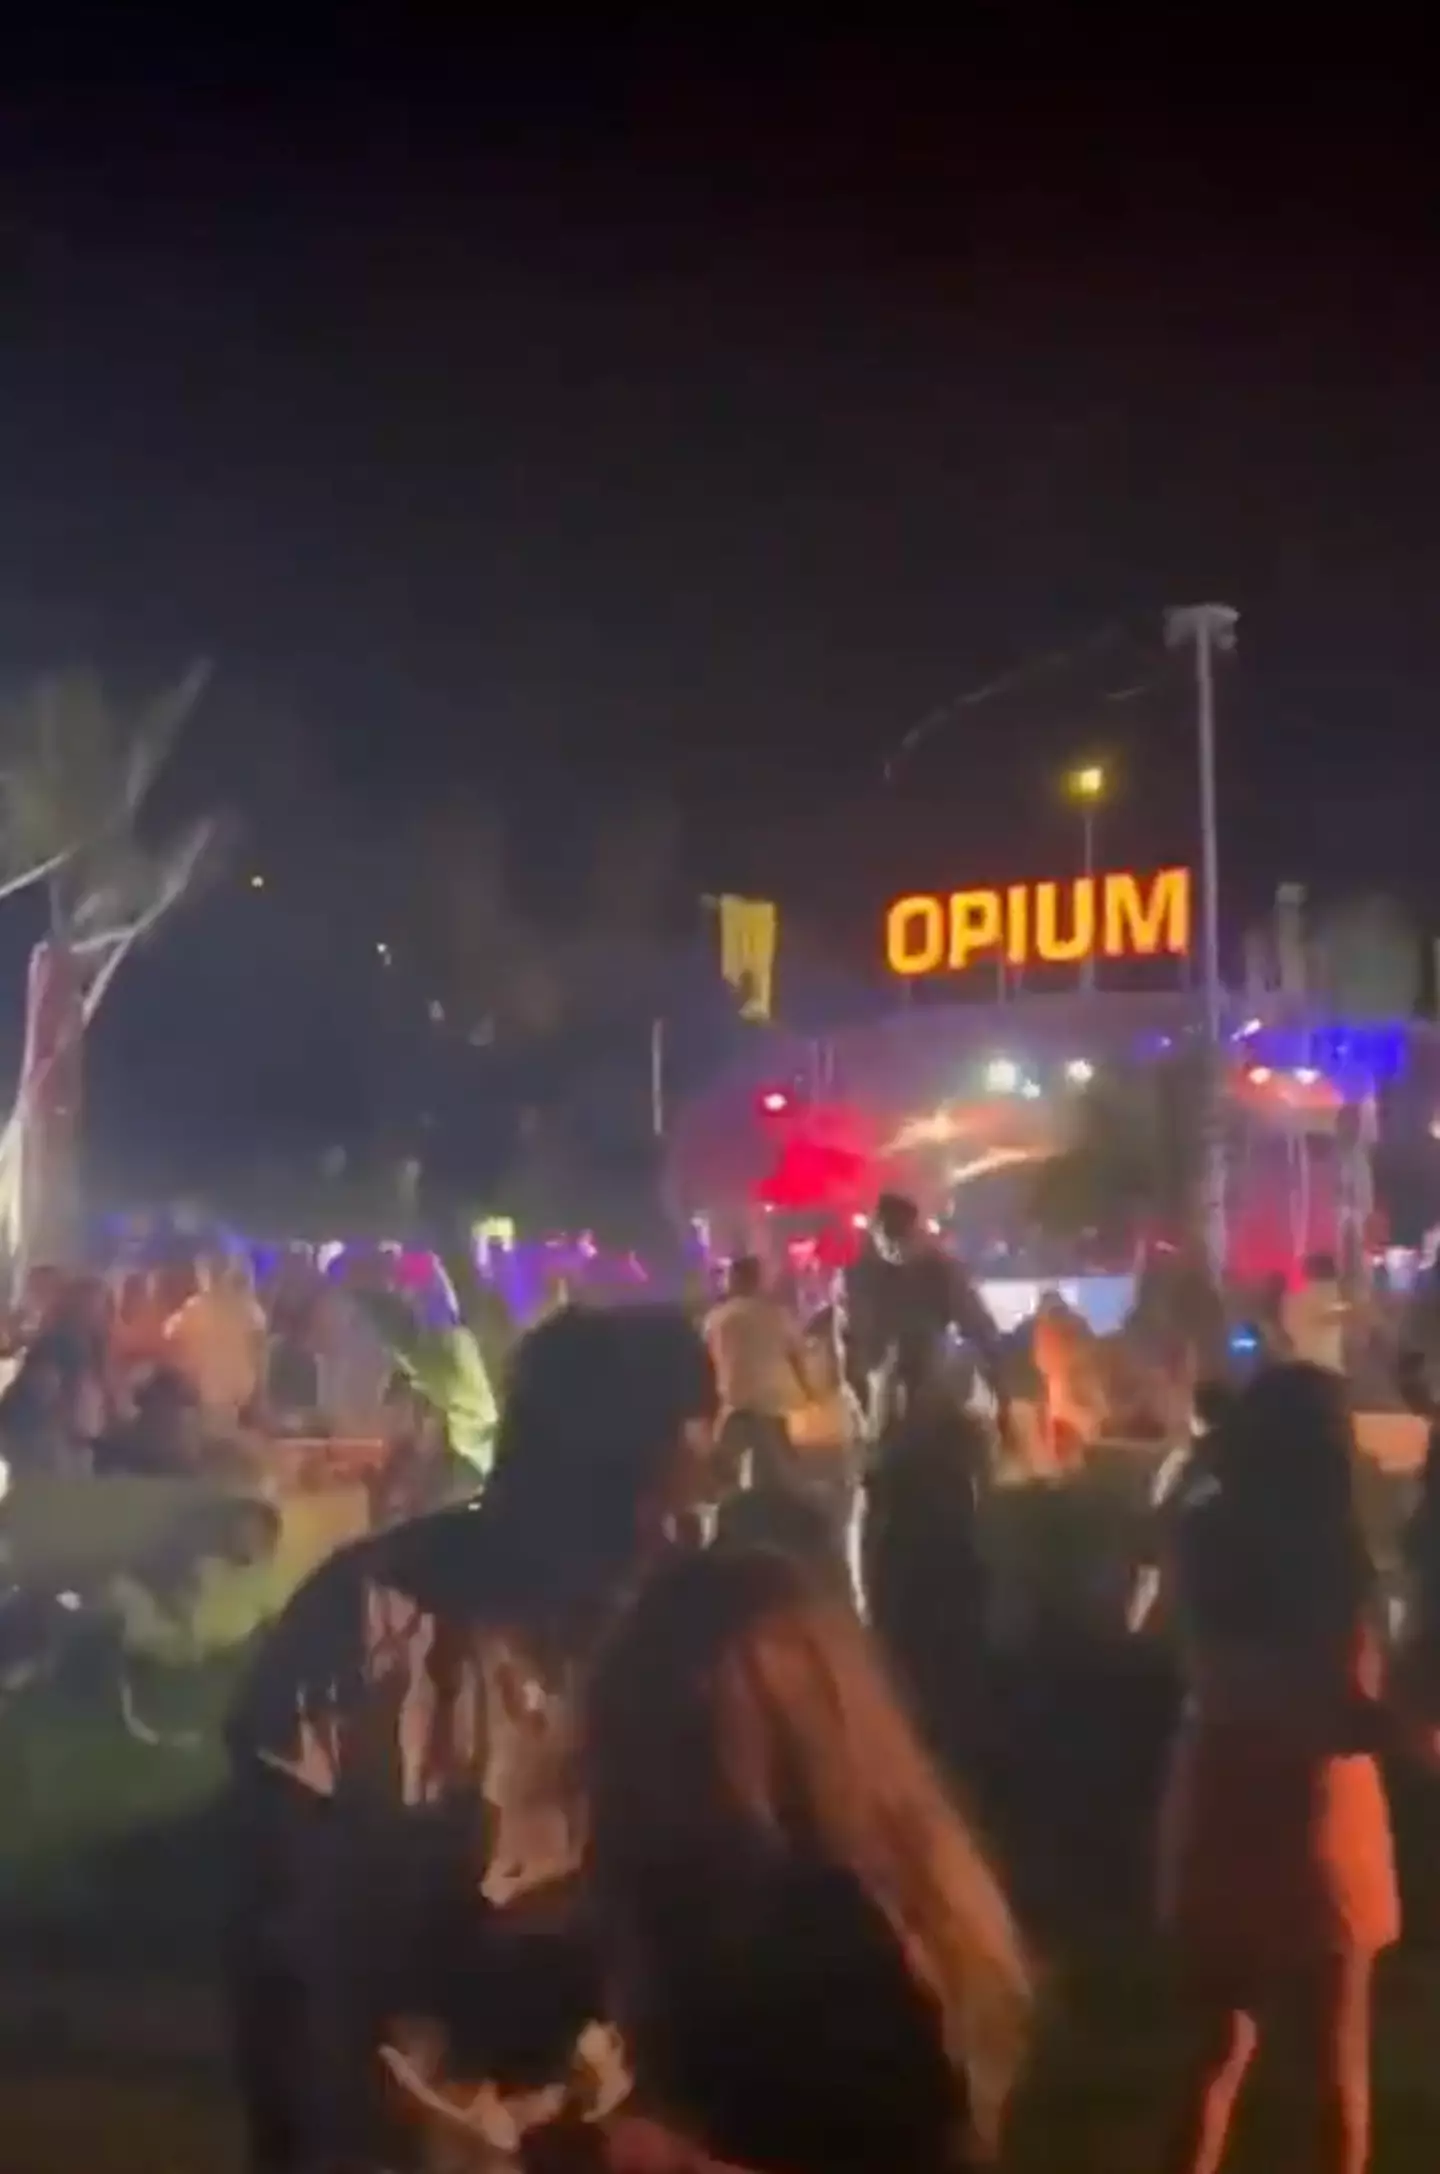 The shooting took place at the Opium night club.